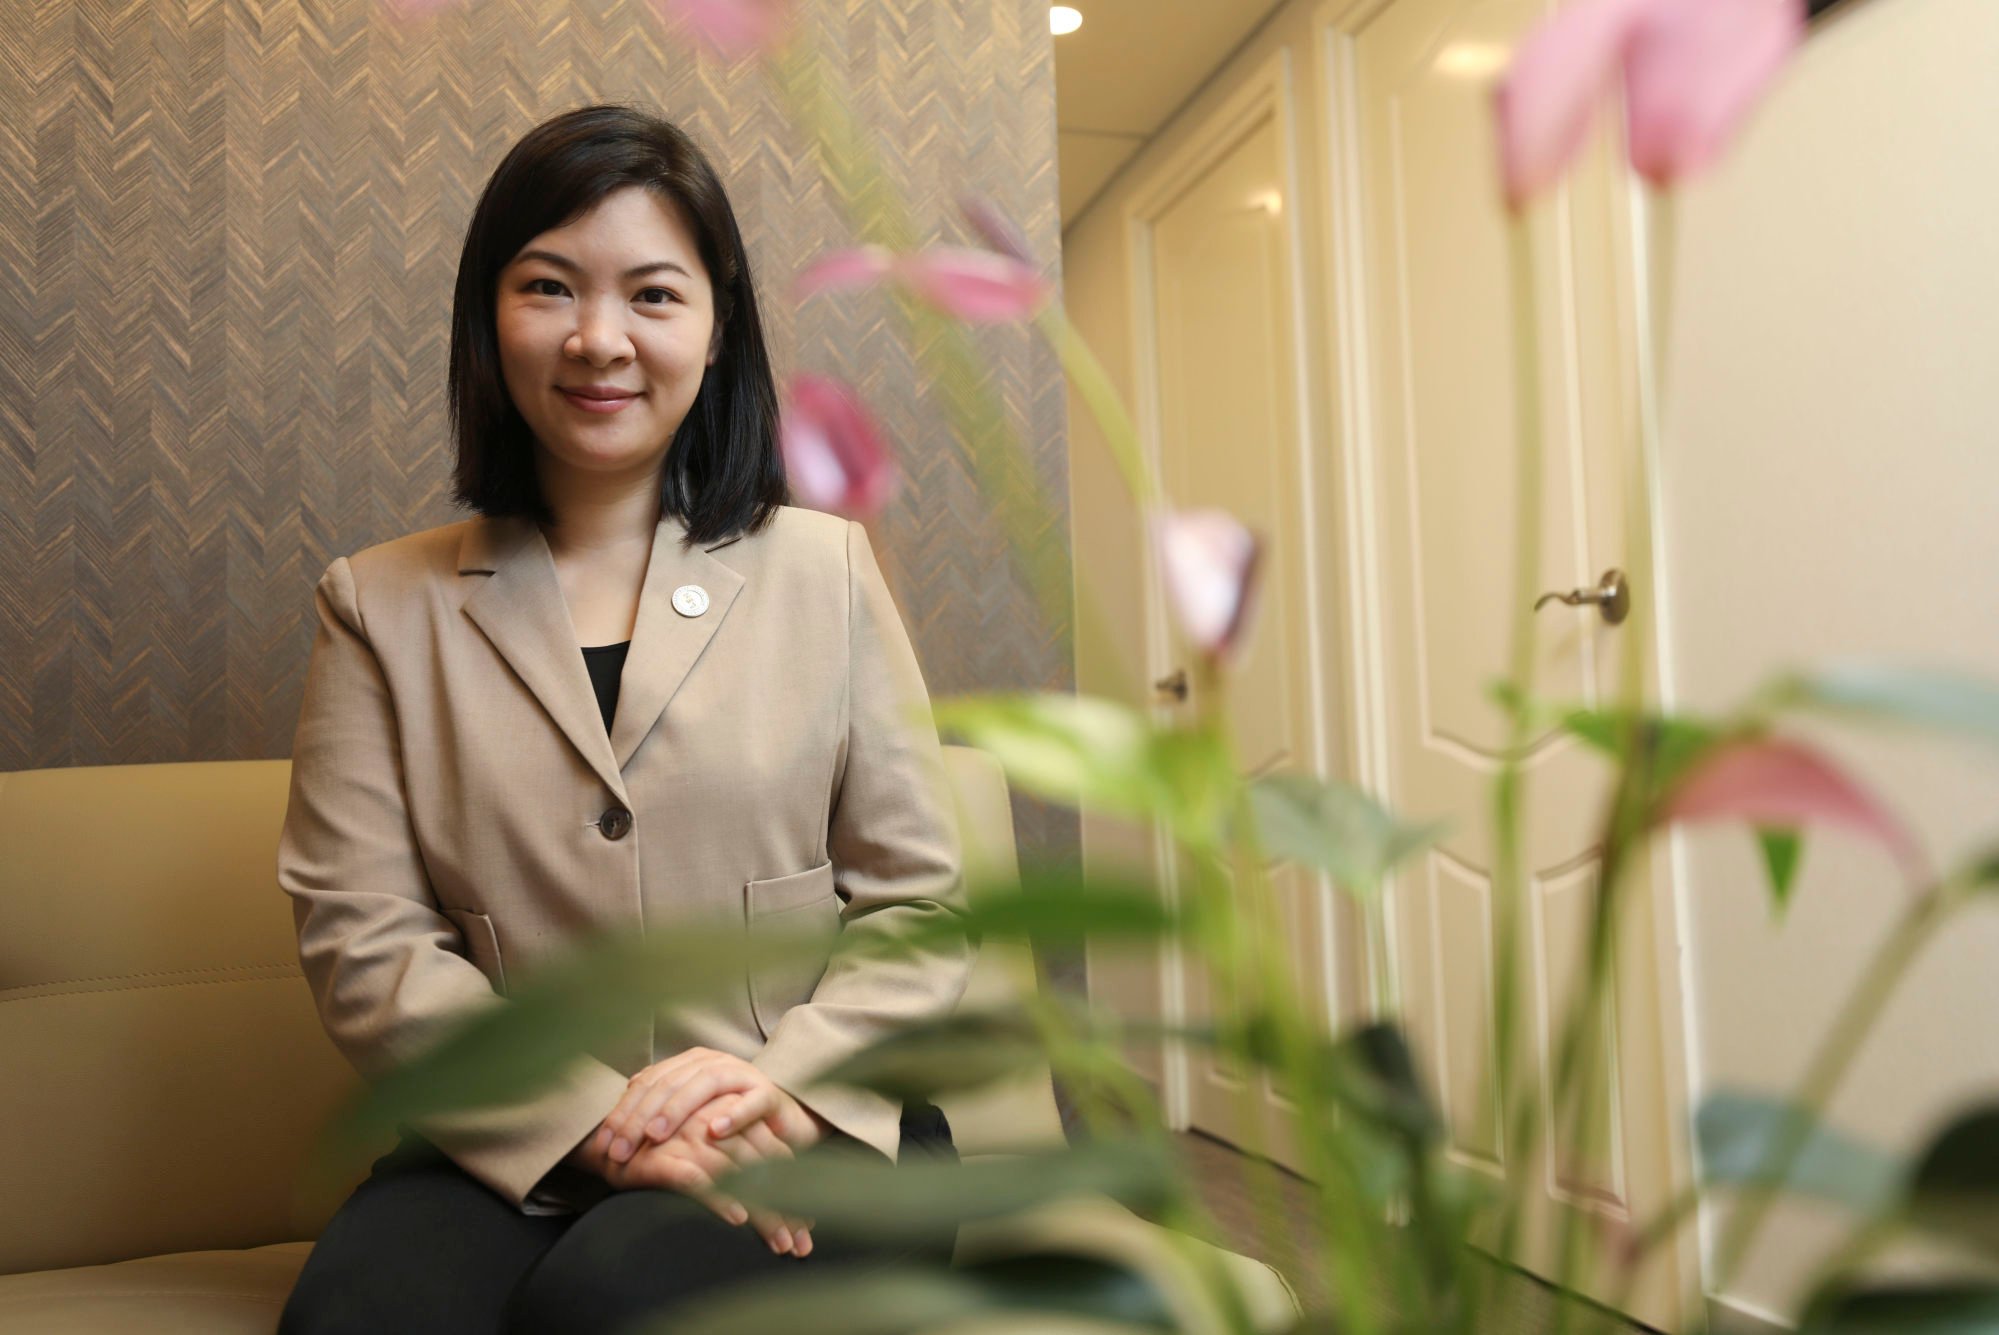 Divorcees account for a fifth of matchmaker Anita Cheung’s clients. Photo: Xiaomei Chen